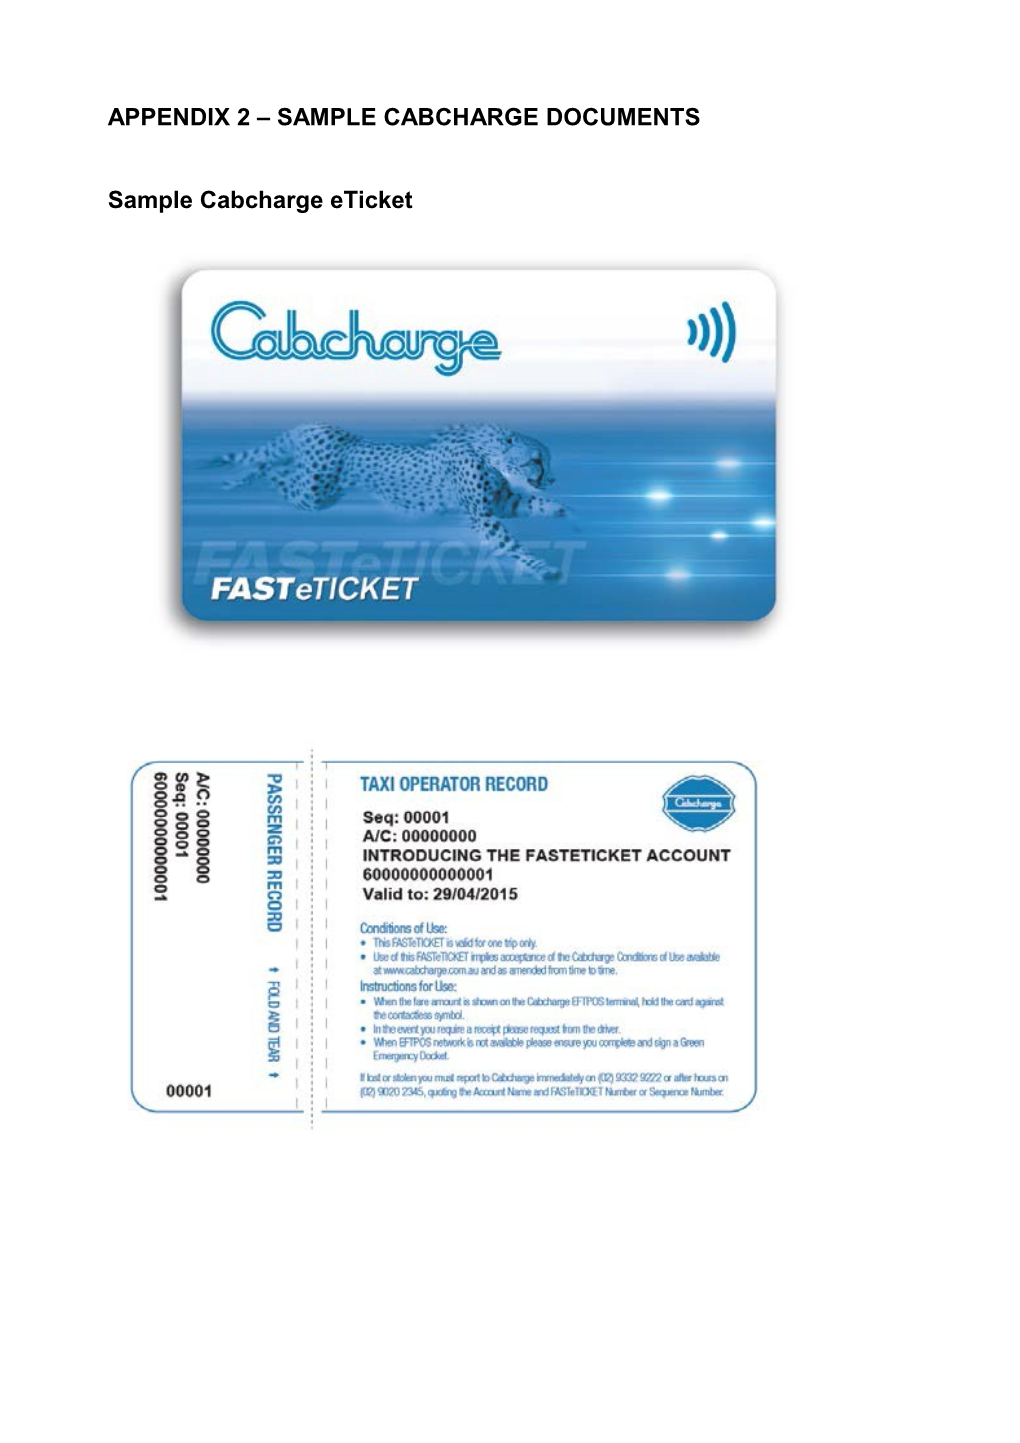 Guidance Note for Use of Cabcharge